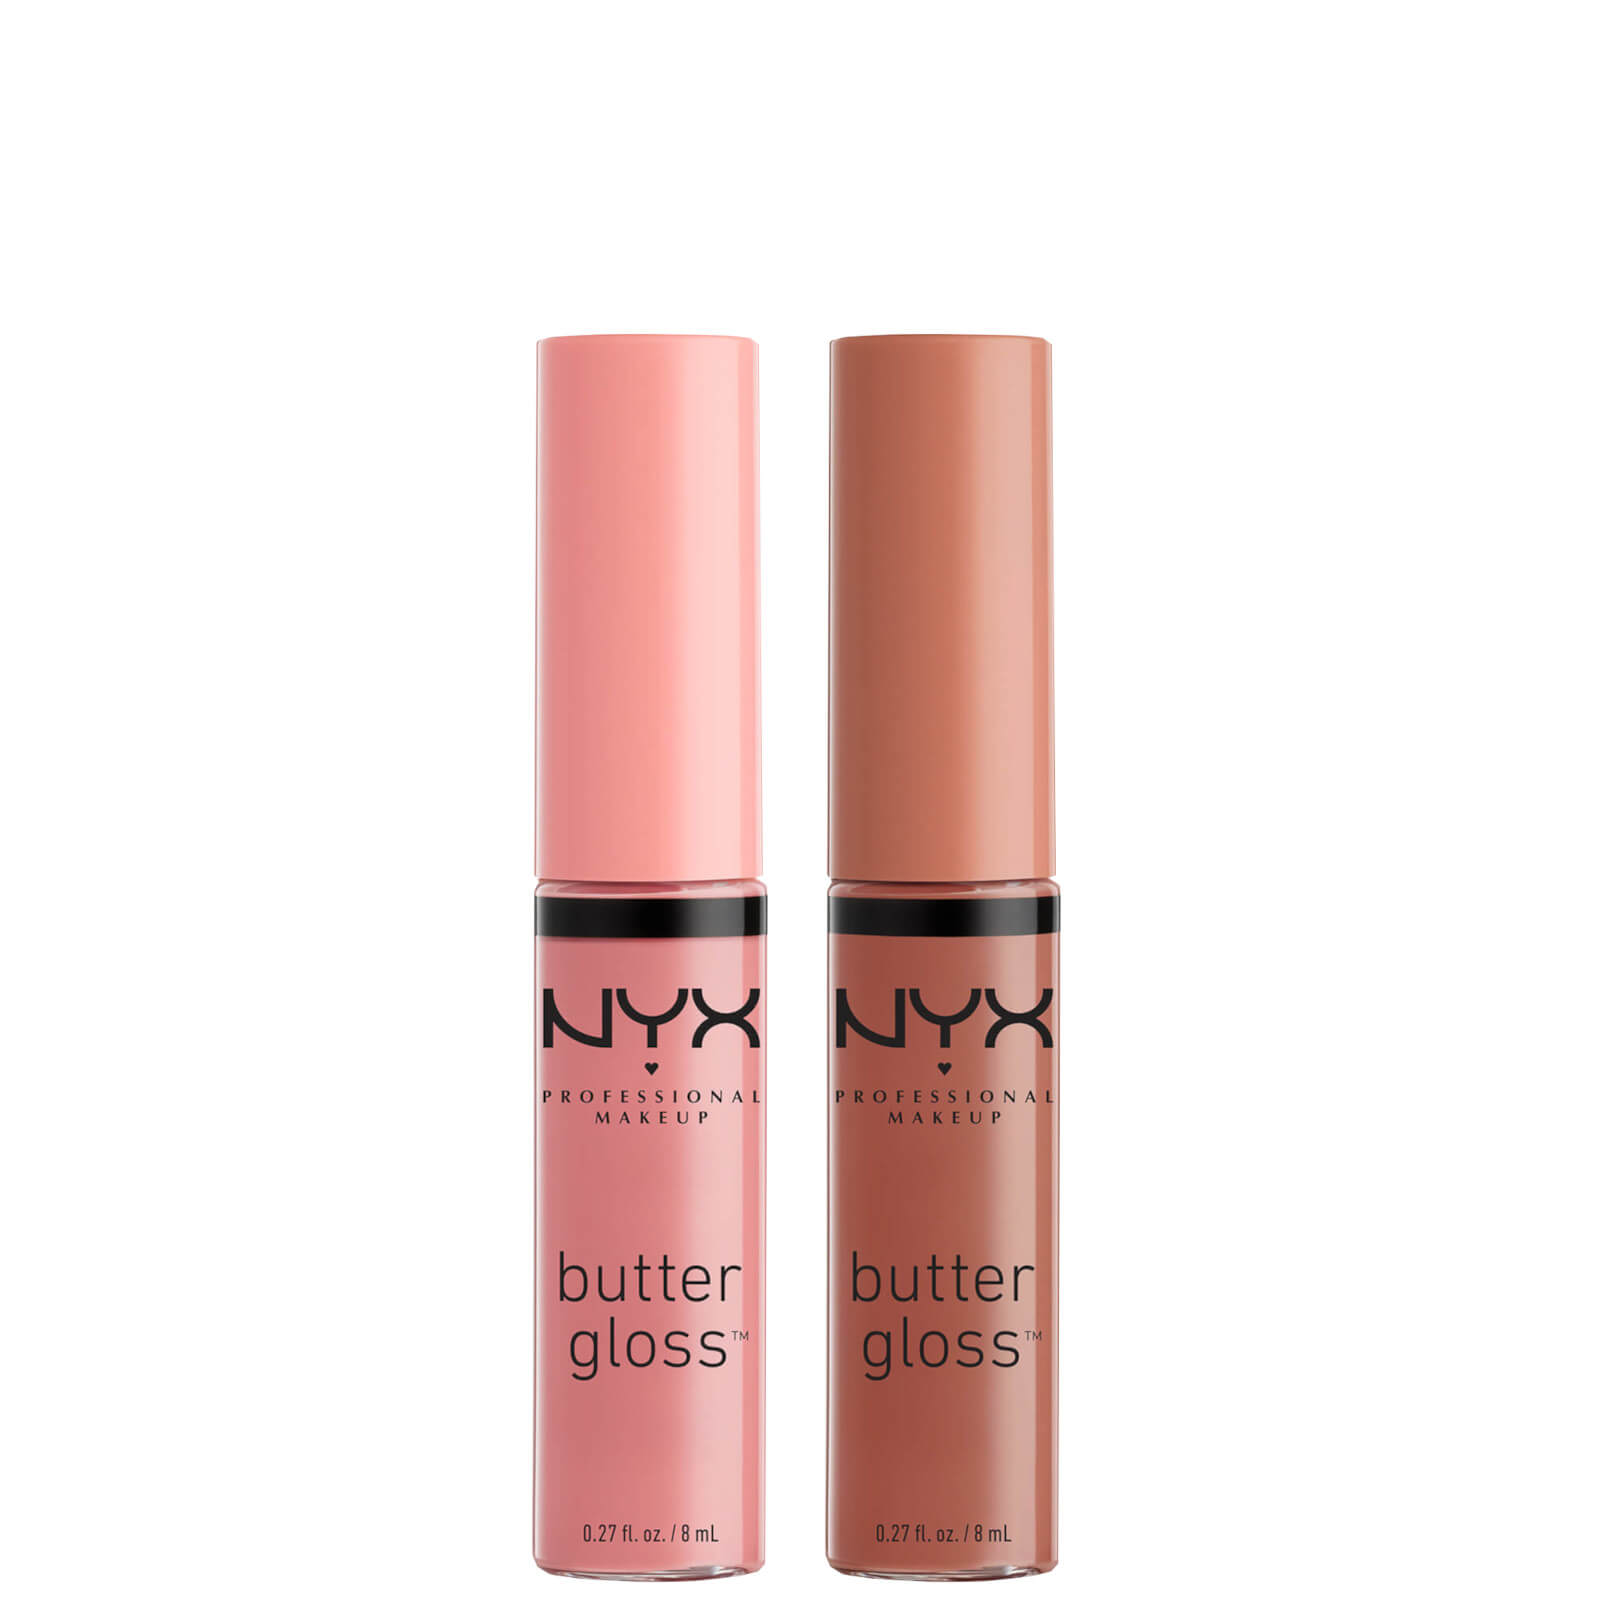 NYX Professional Makeup Butter Gloss Lip Gloss Duo - Praline and Crème Brulee